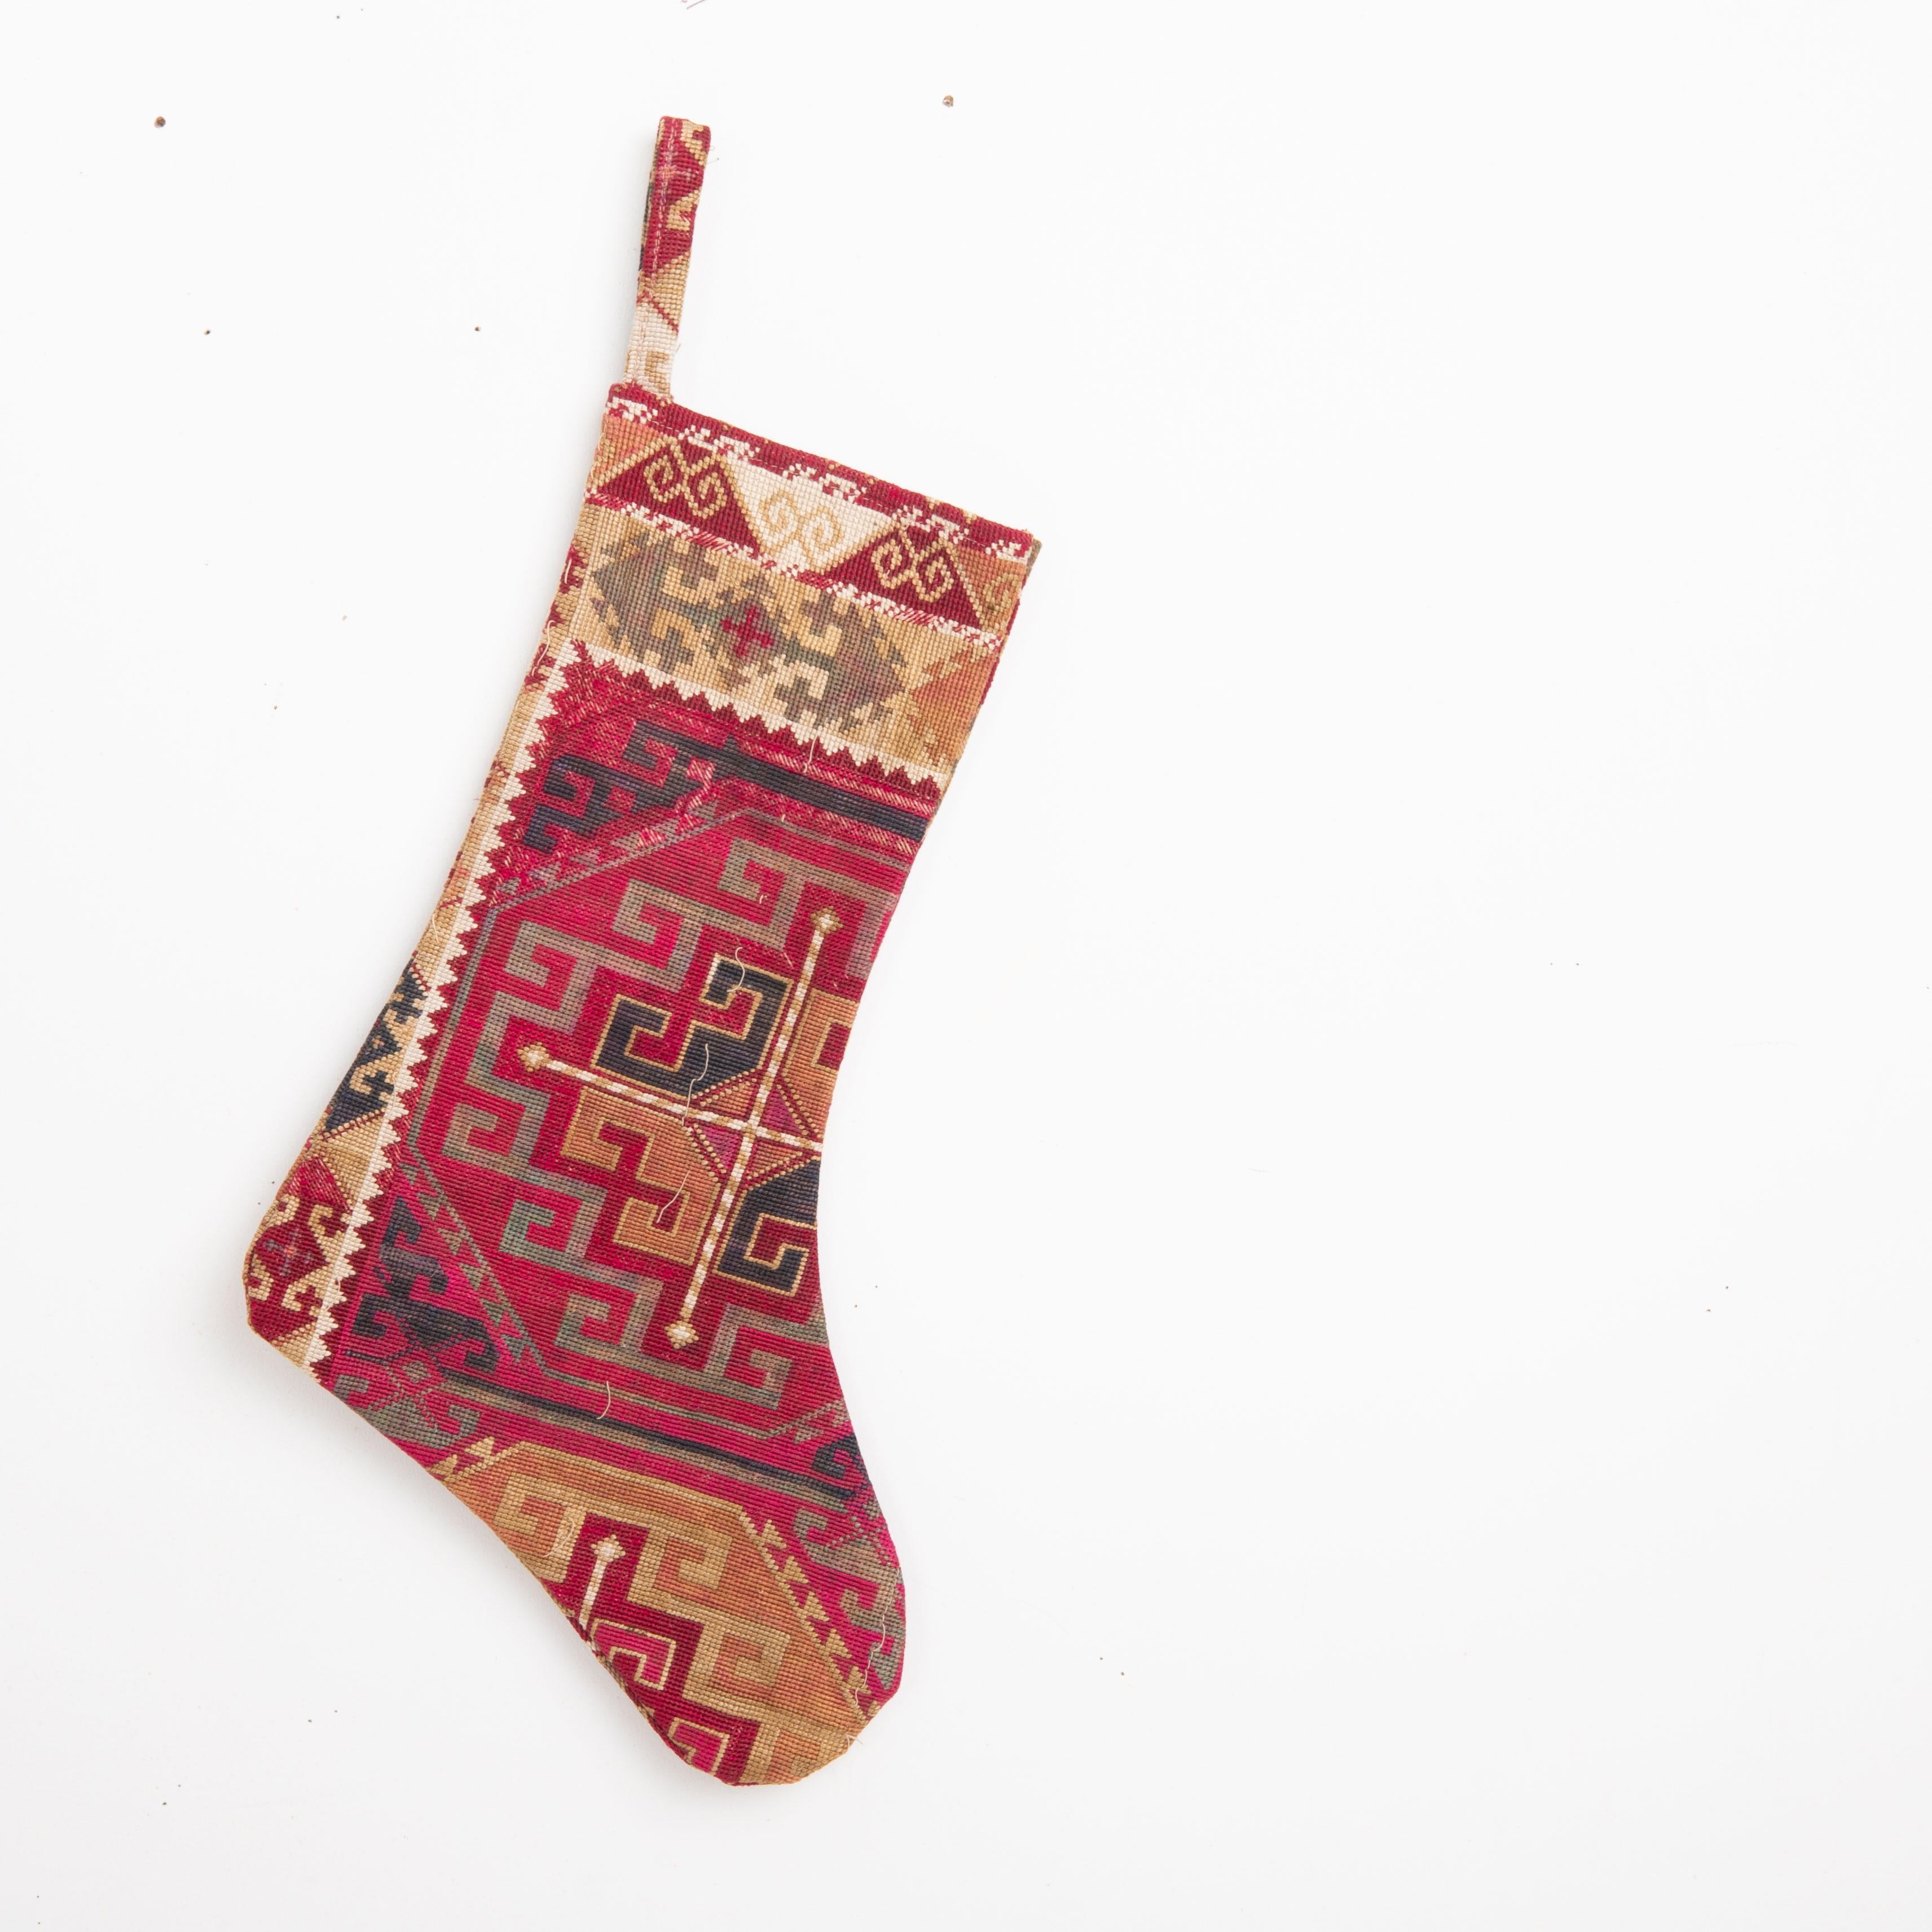 These Christmas Stockings were made from mid 20th C, or so  Uzbek Lakai embroidery fragments.

Please note these were made from vintage embroidery fragments.
